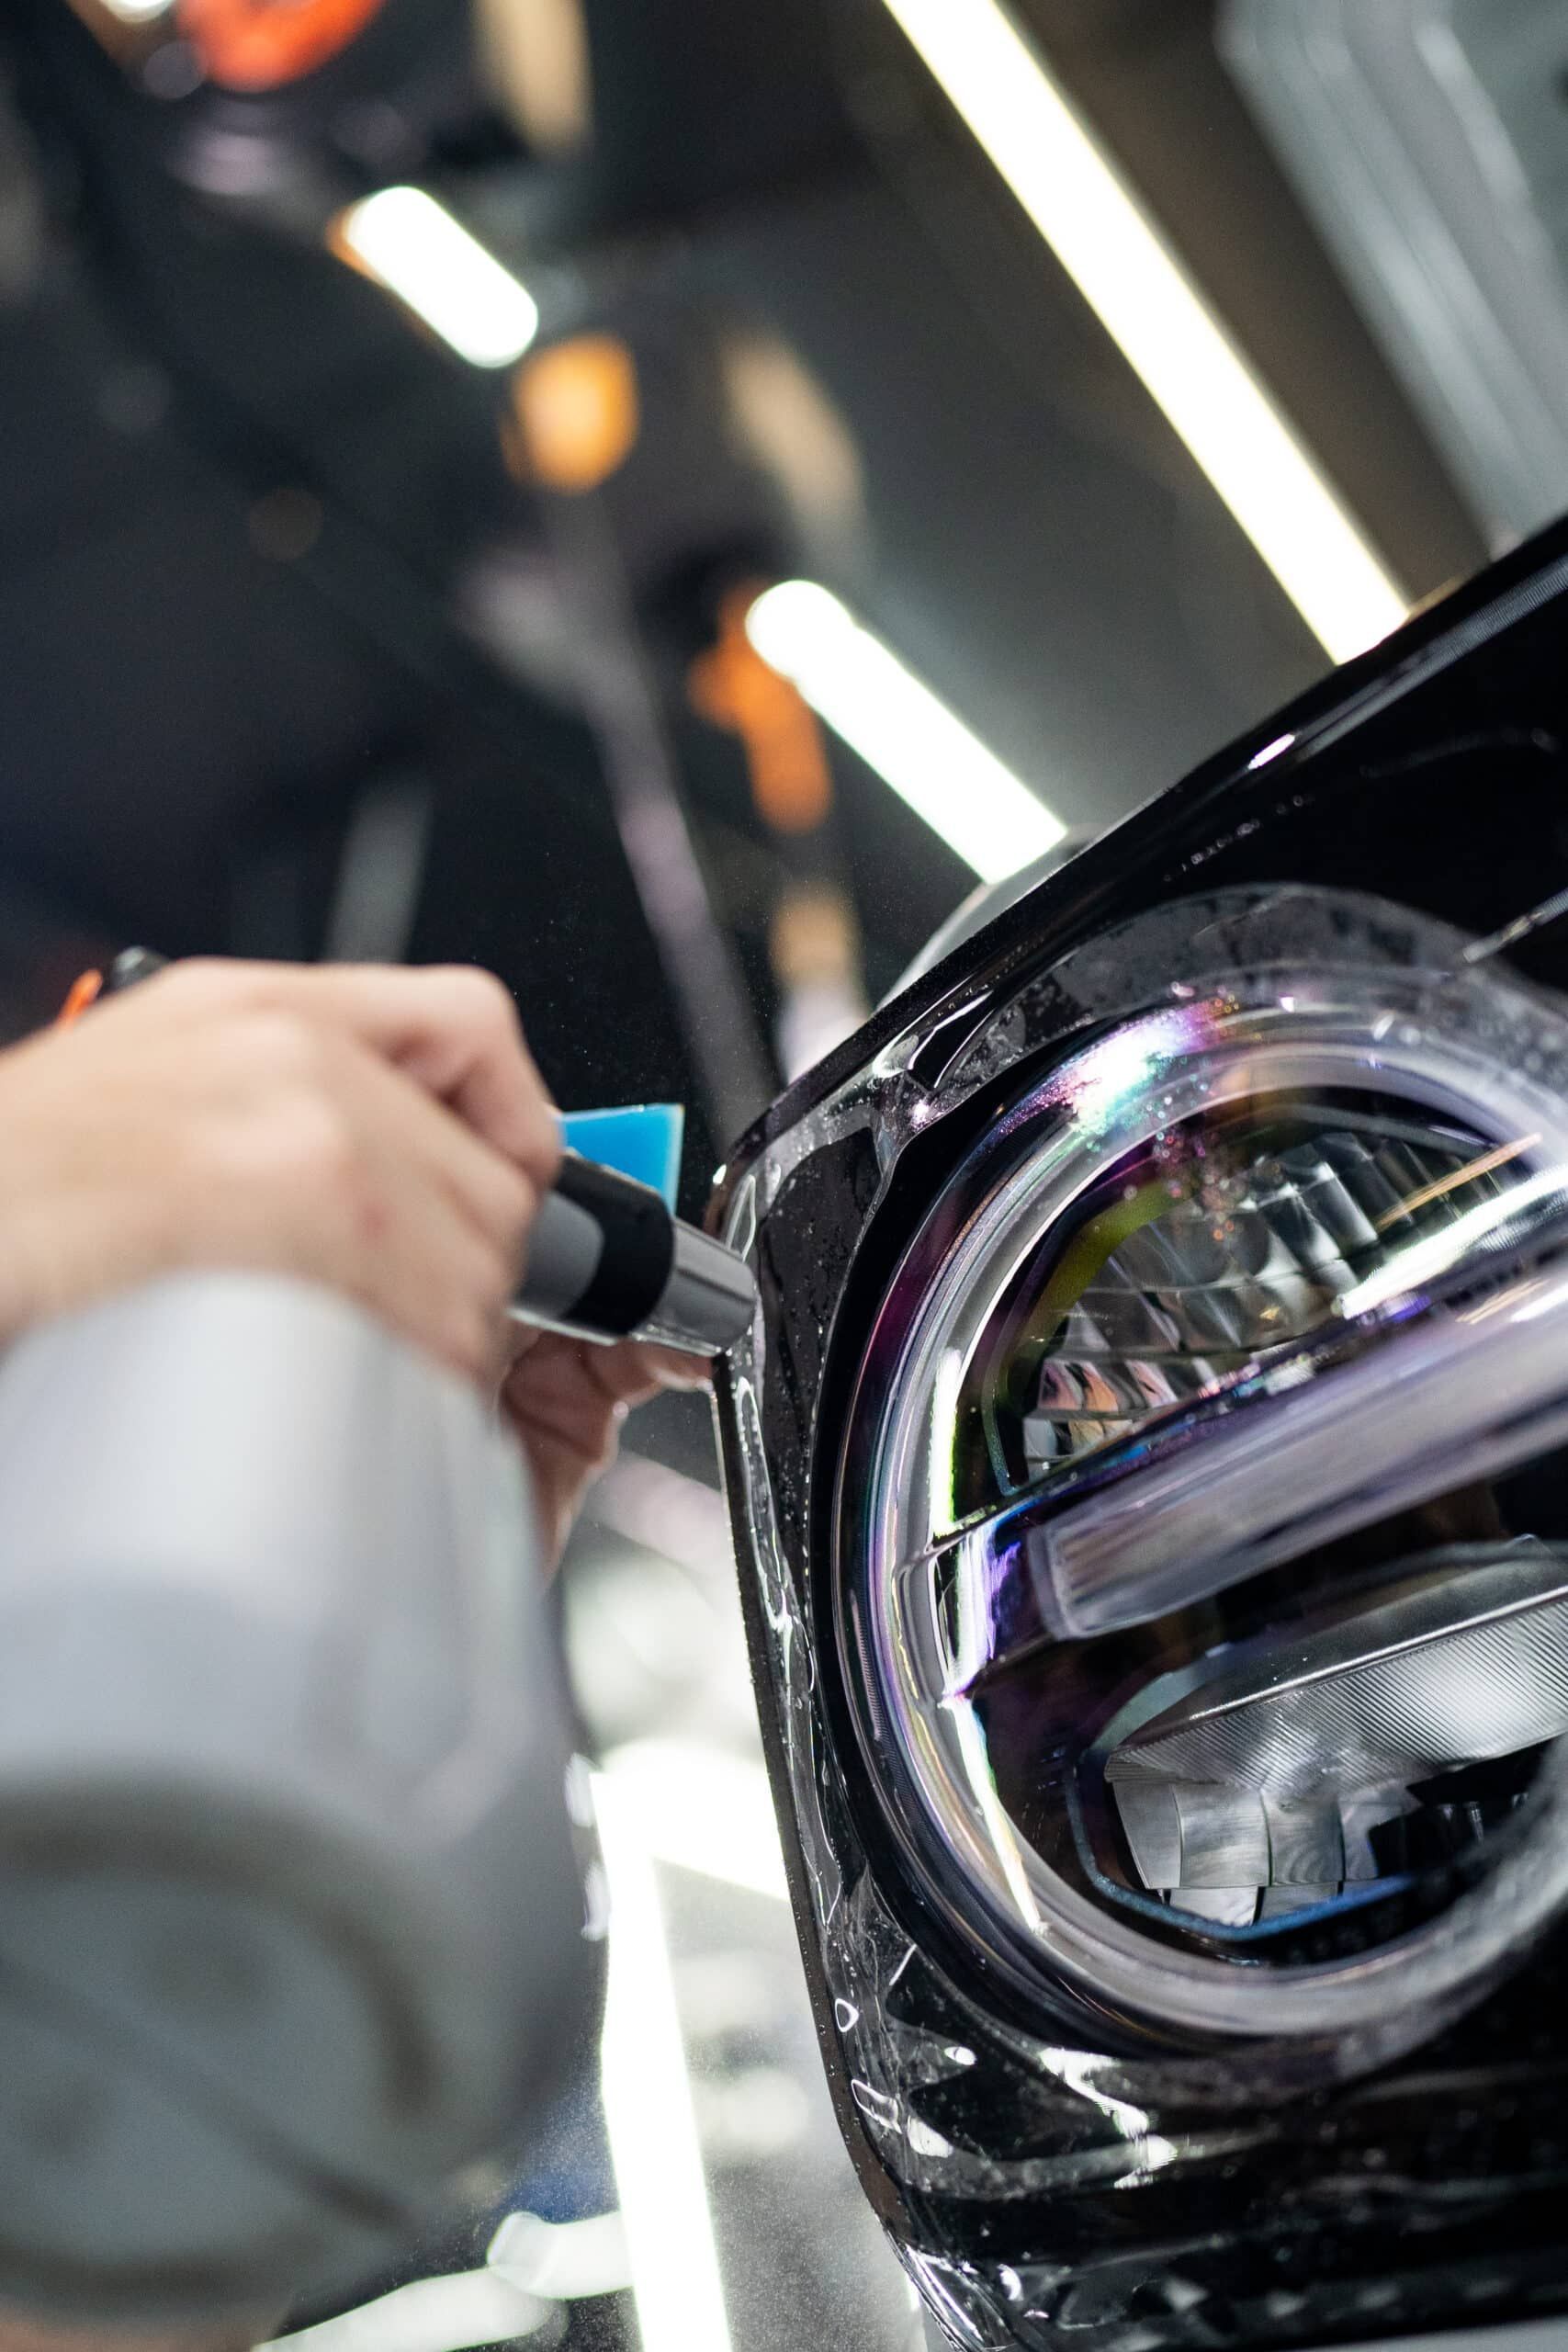 A person is applying protective film to the headlight of a car.